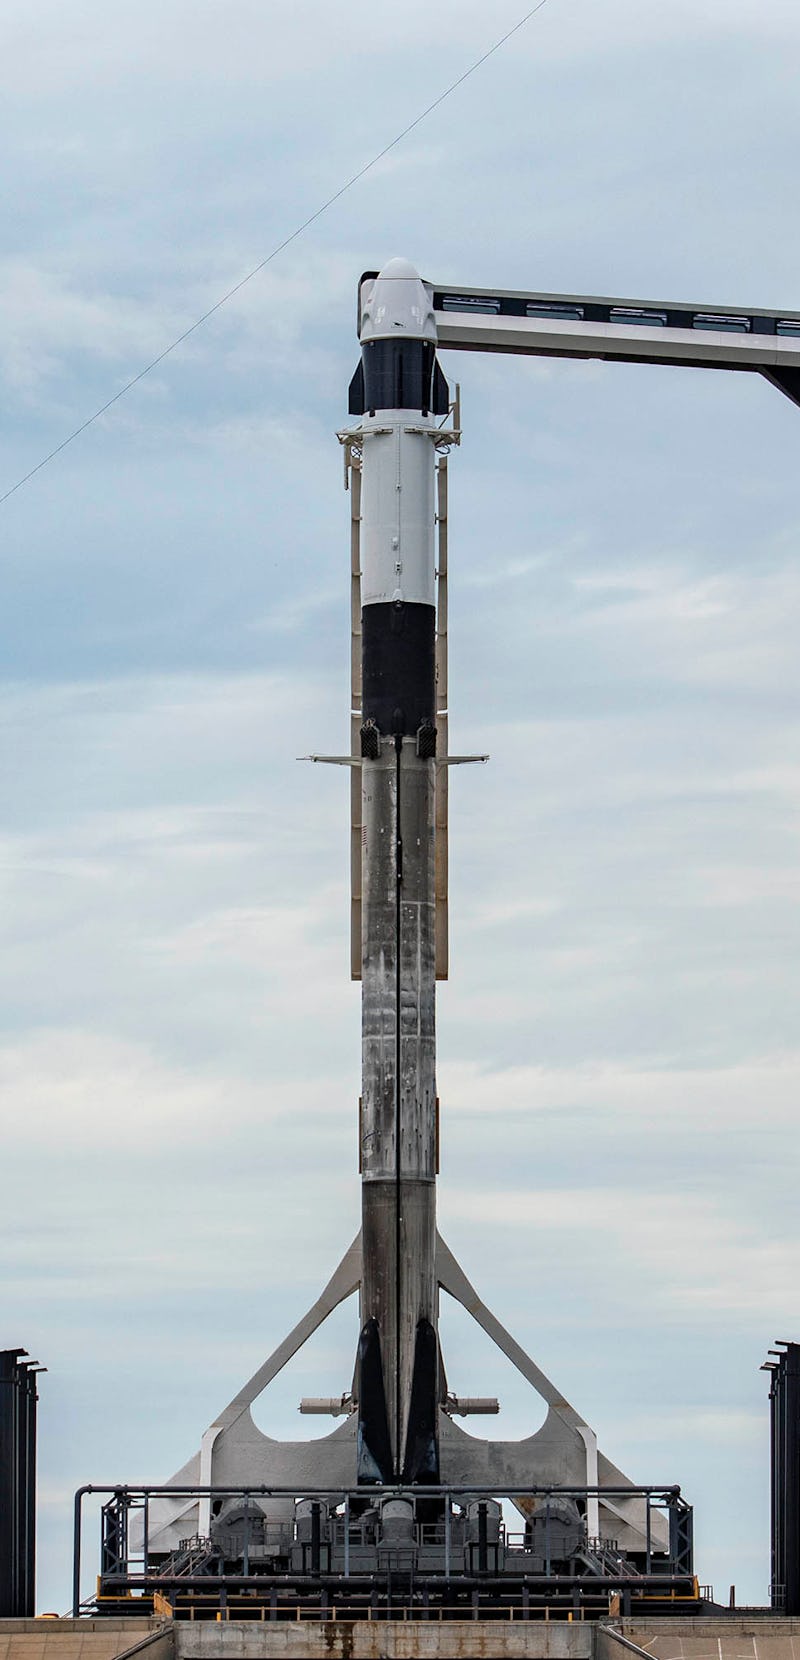 Falcon 9 rocket and Crew Dragon capsule on launchpad